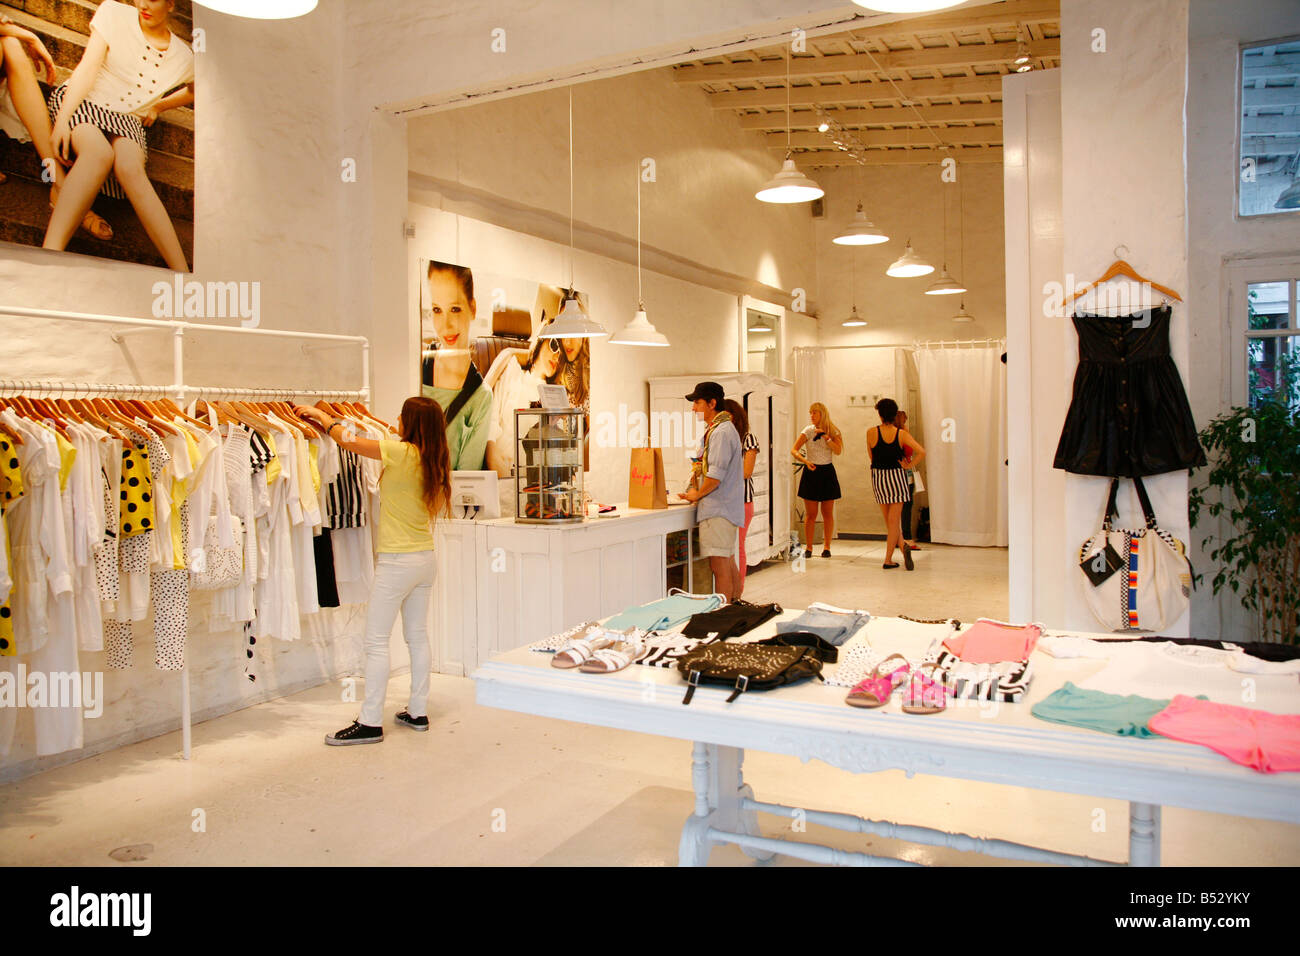 March 2008 - Lupe Fashion shop in the trendy area of Palermo Viejo known as Soho Buenos Aires Argentina Stock Photo